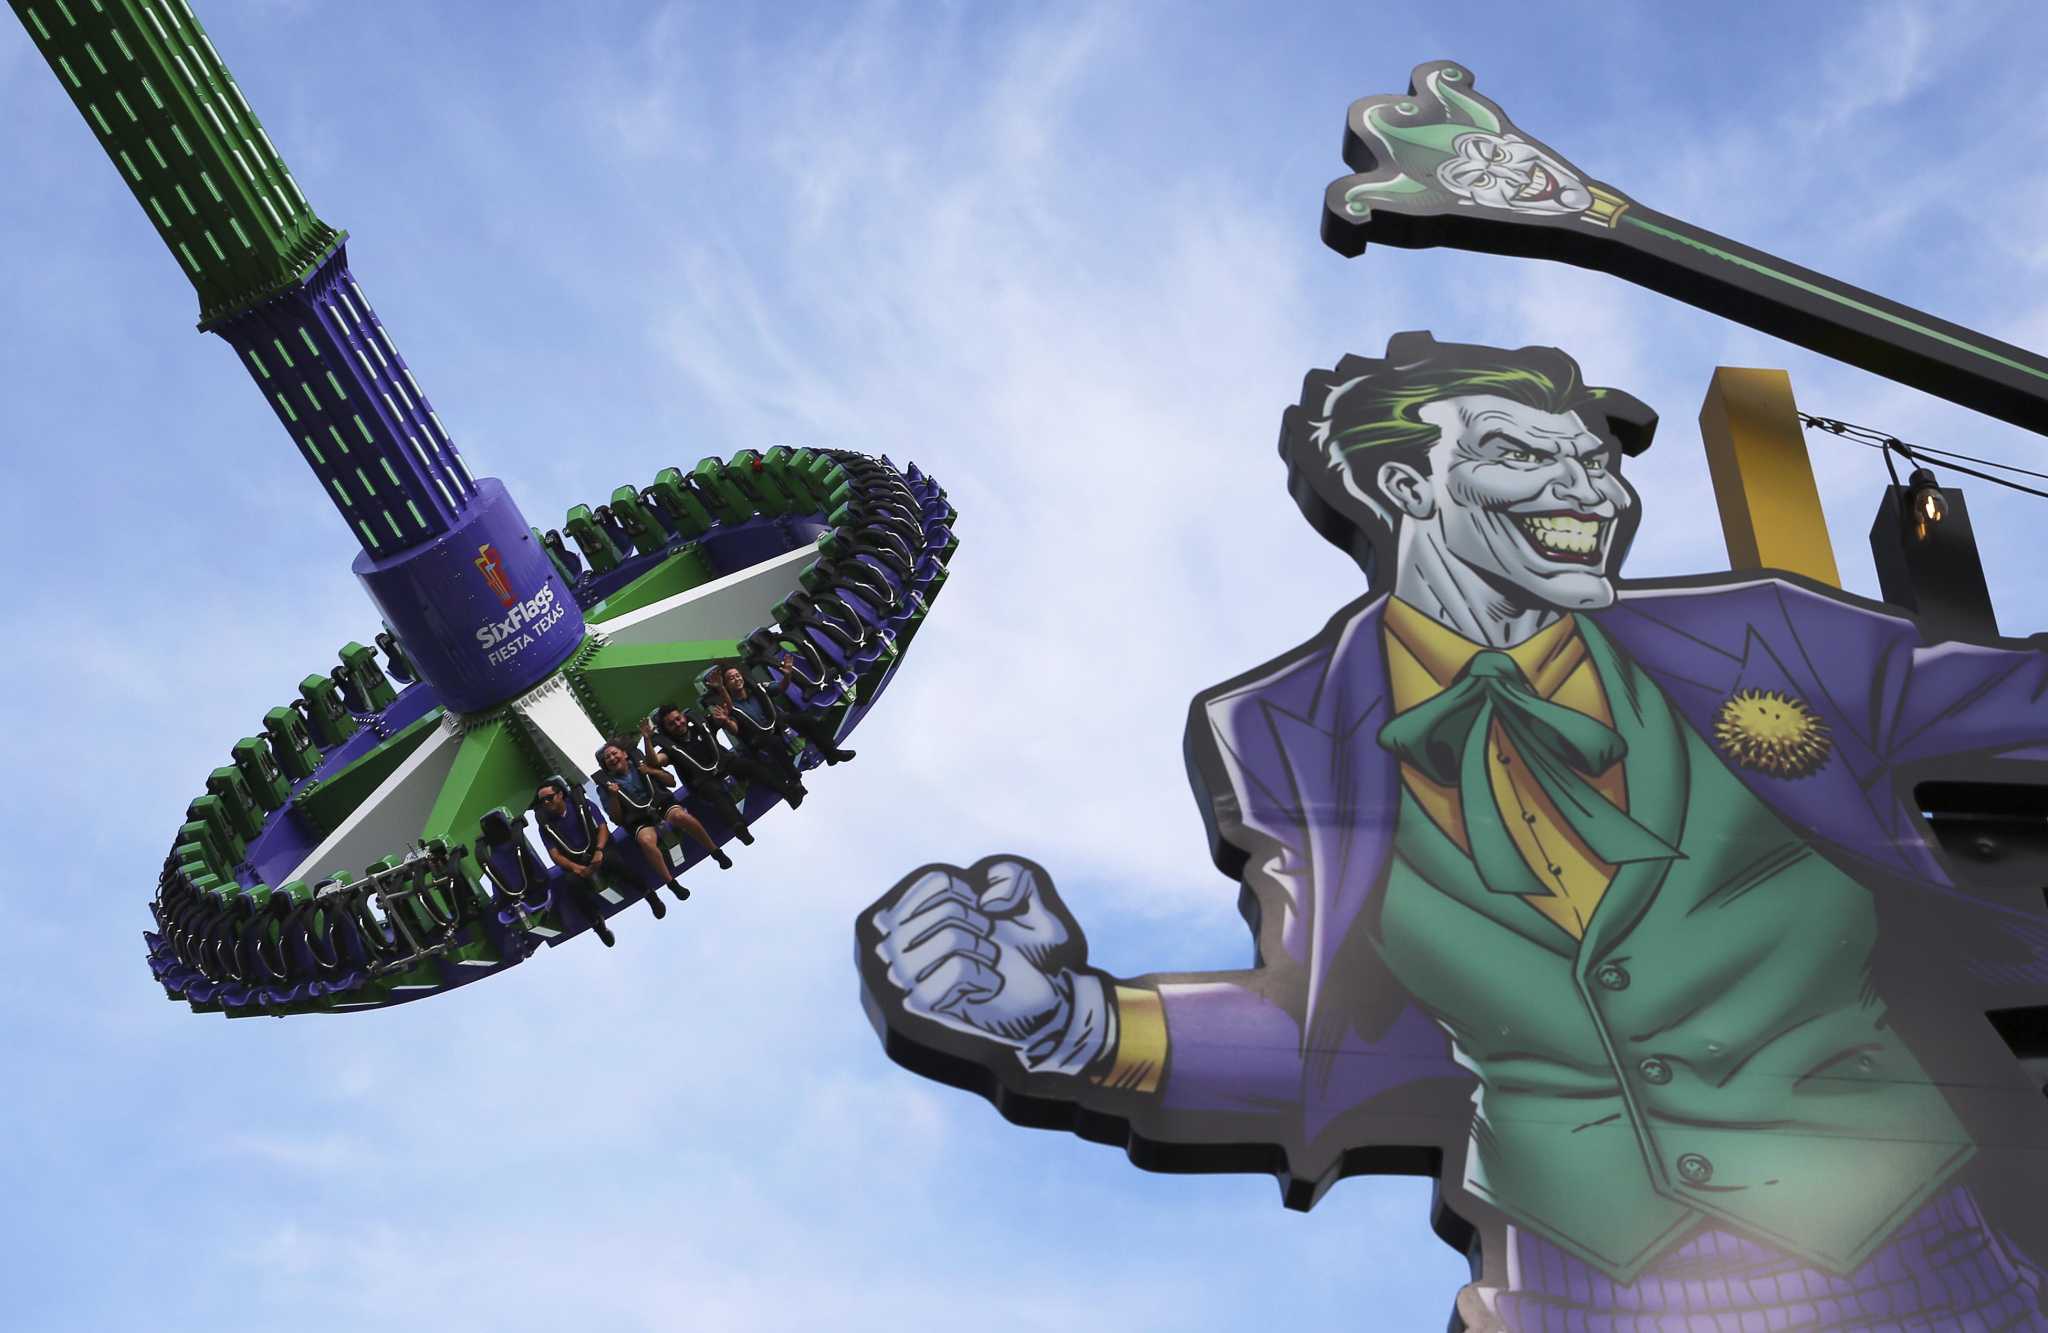 The Joker Carnival of Chaos Opens at Six Flags Fiesta Texas